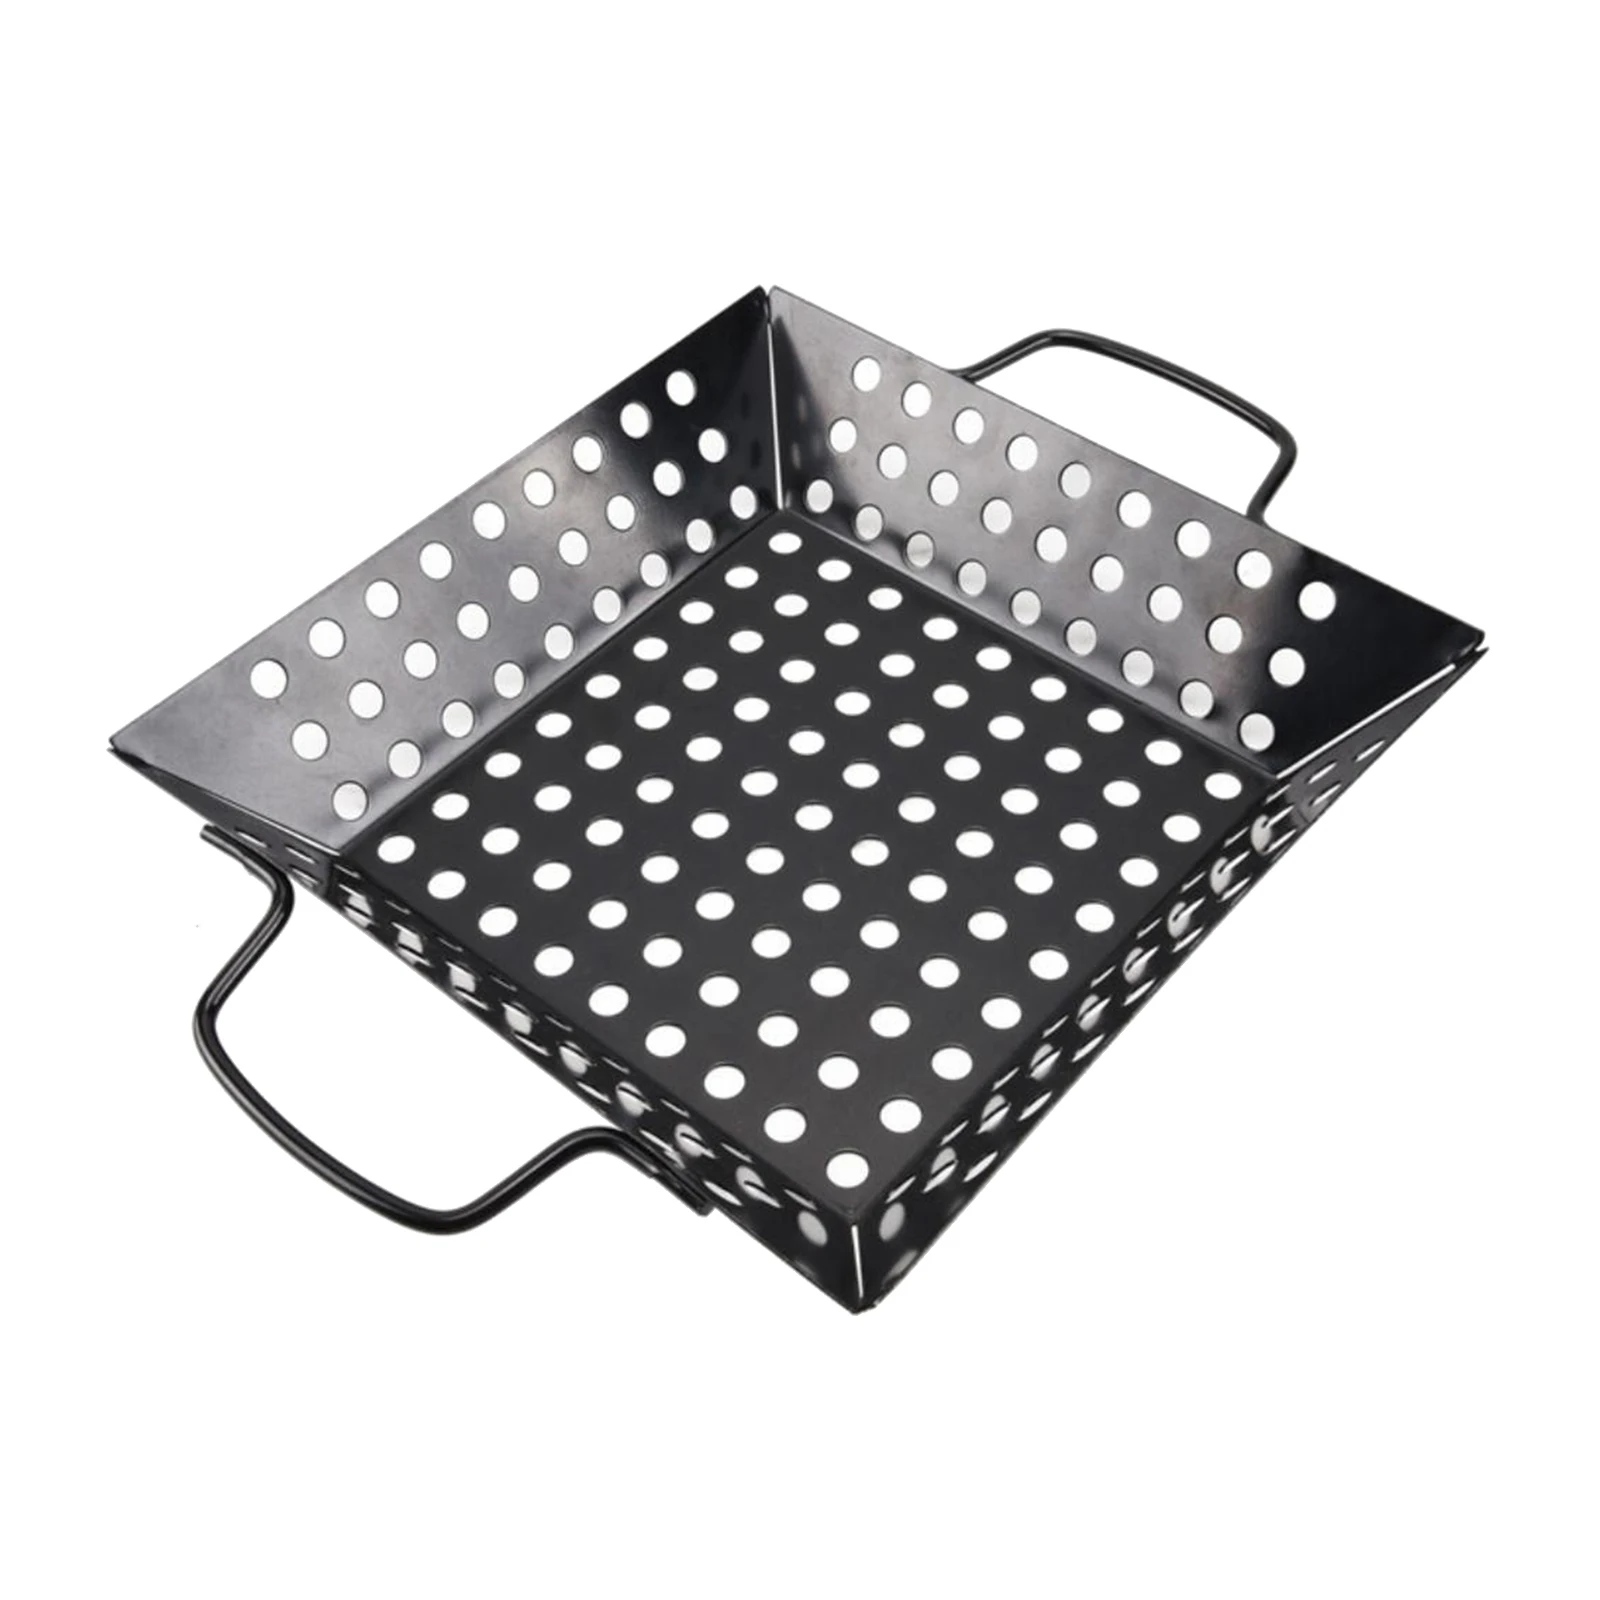 Grill Pan Carbon Steel Barbecue Grill Plate Food Basket Tray Grilling Wok